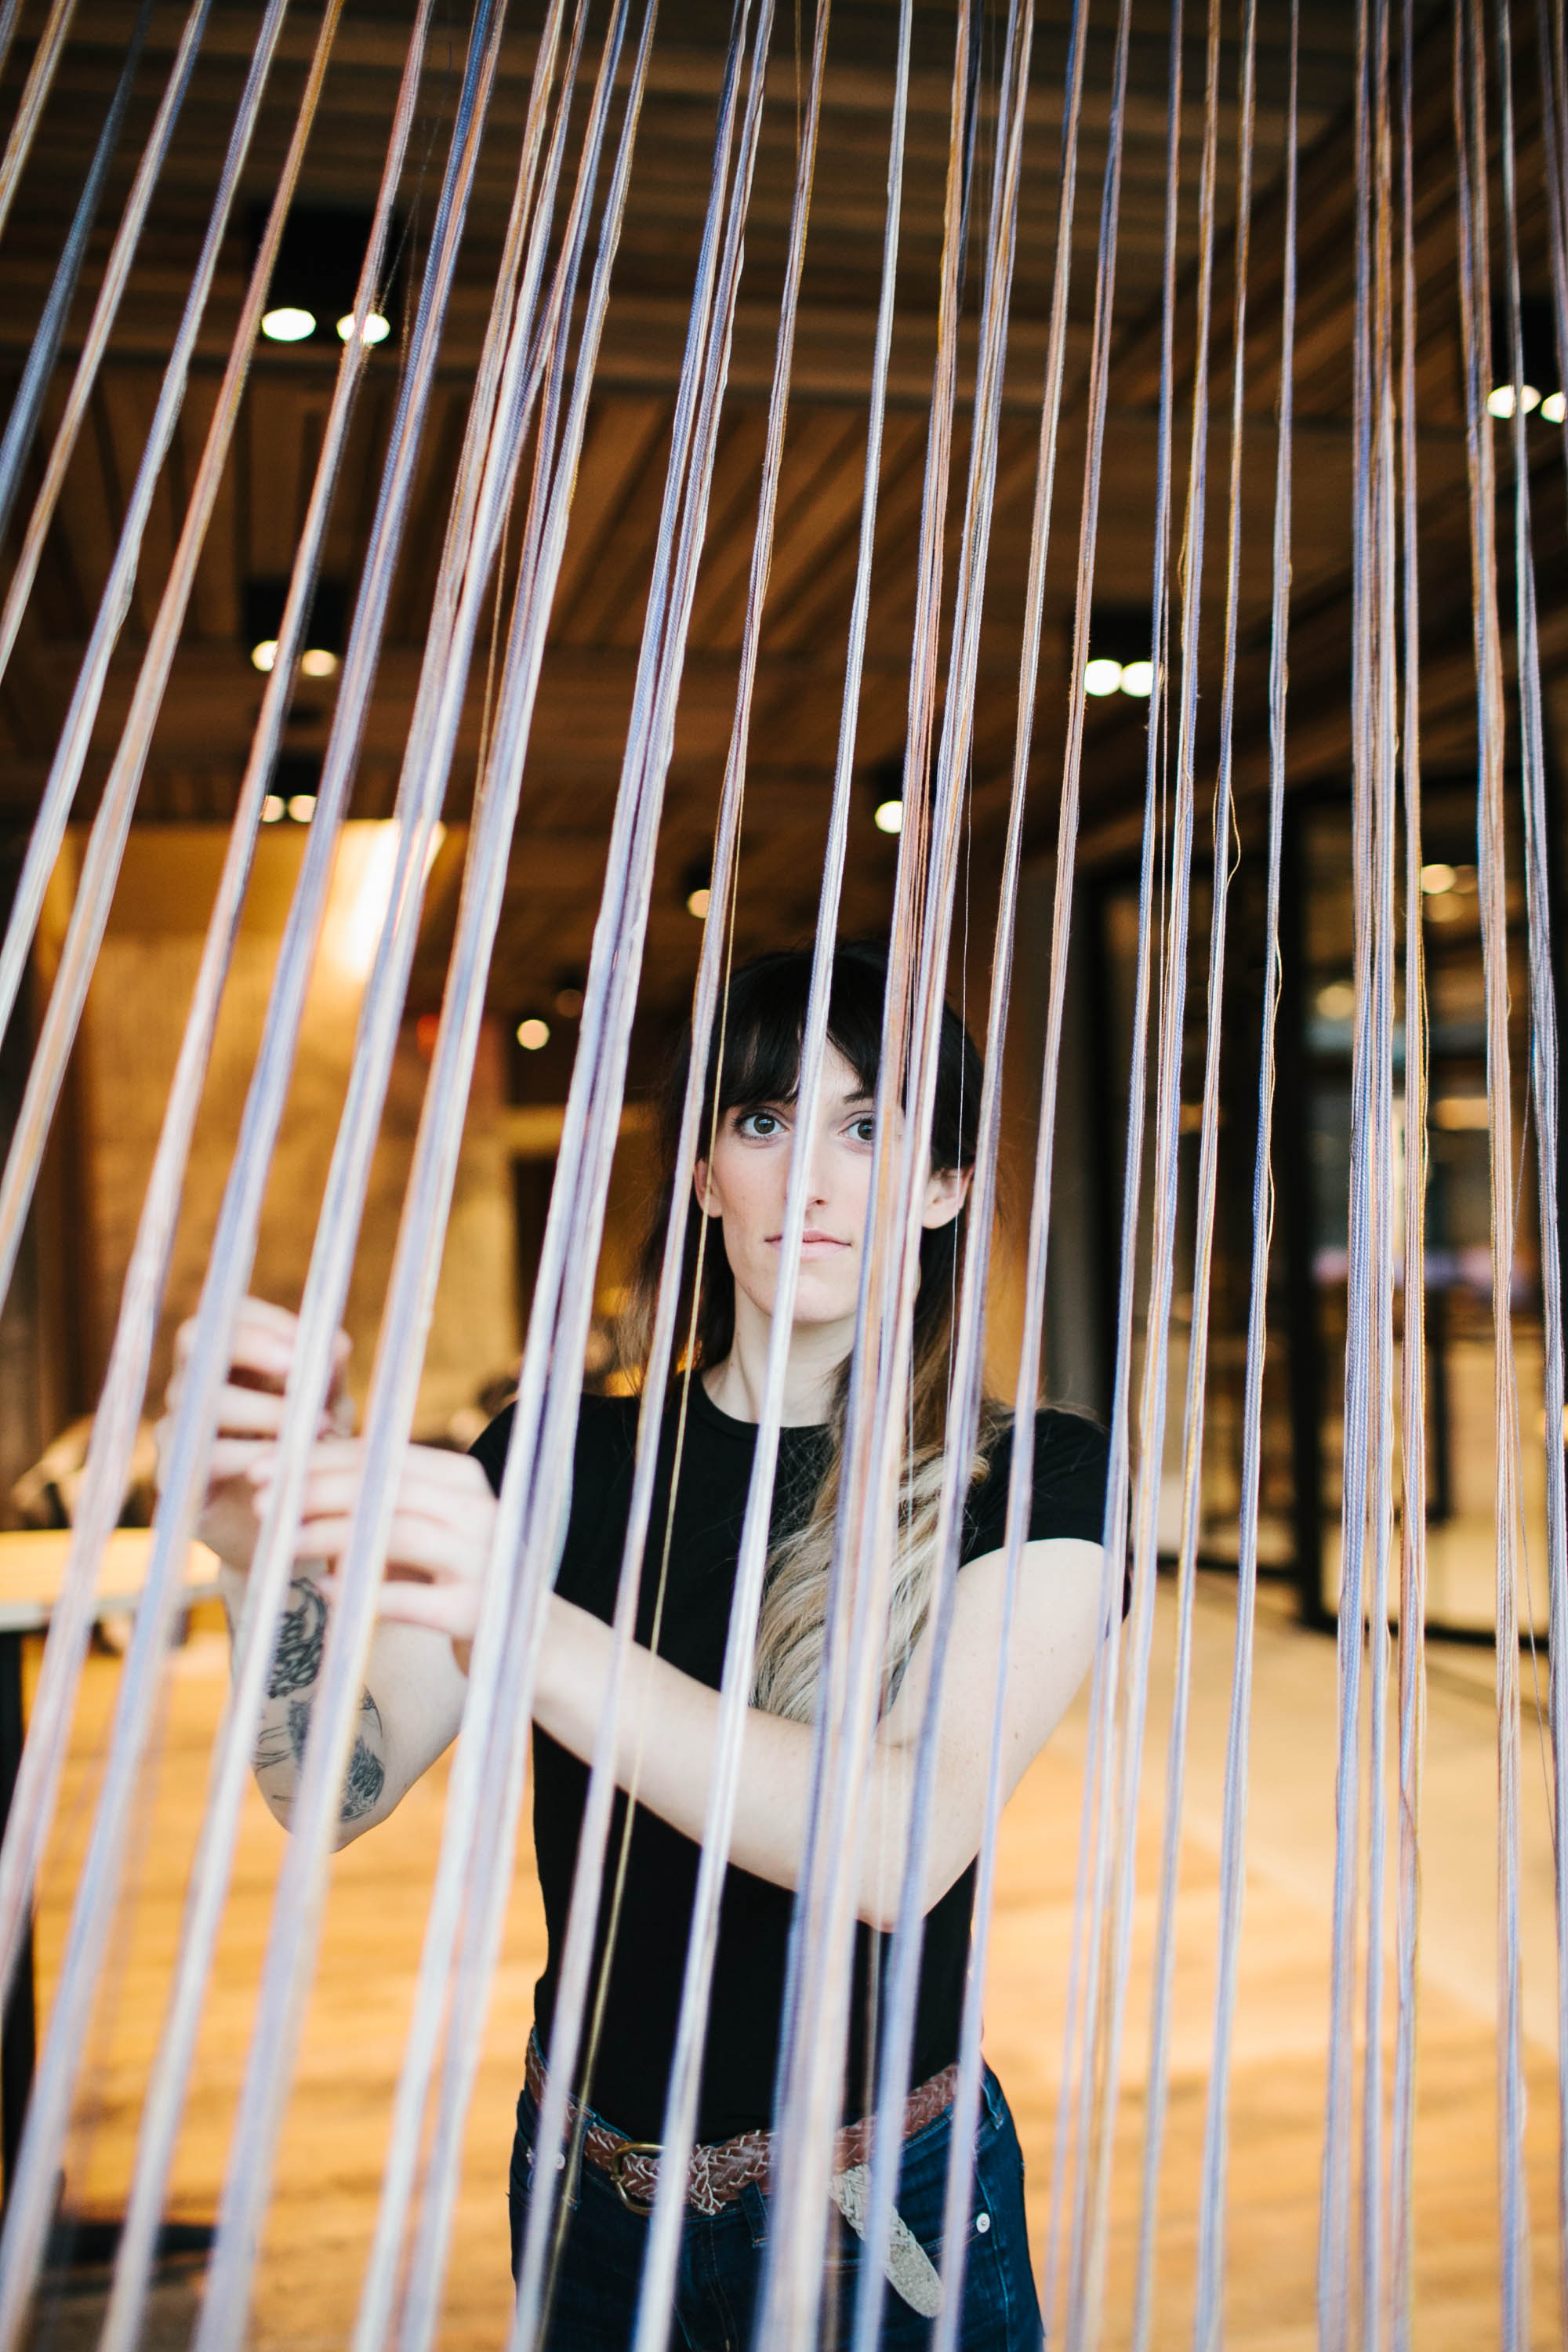 A woman standing behind long colorful strings of fabric